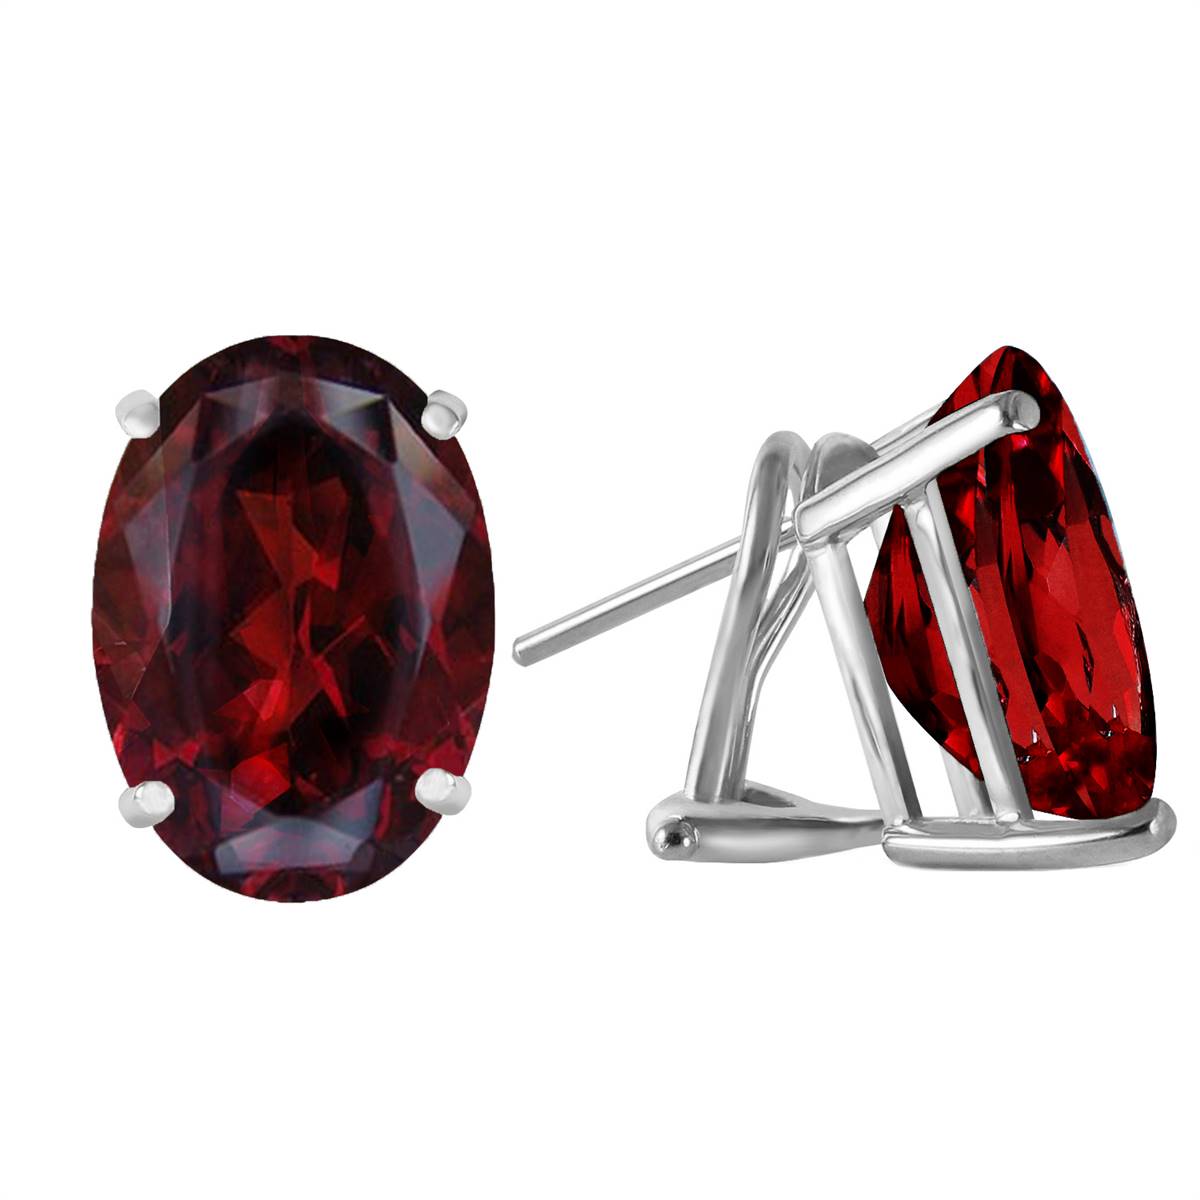 13 Carat 14K Solid White Gold French Clips Earrings Natural Garnet